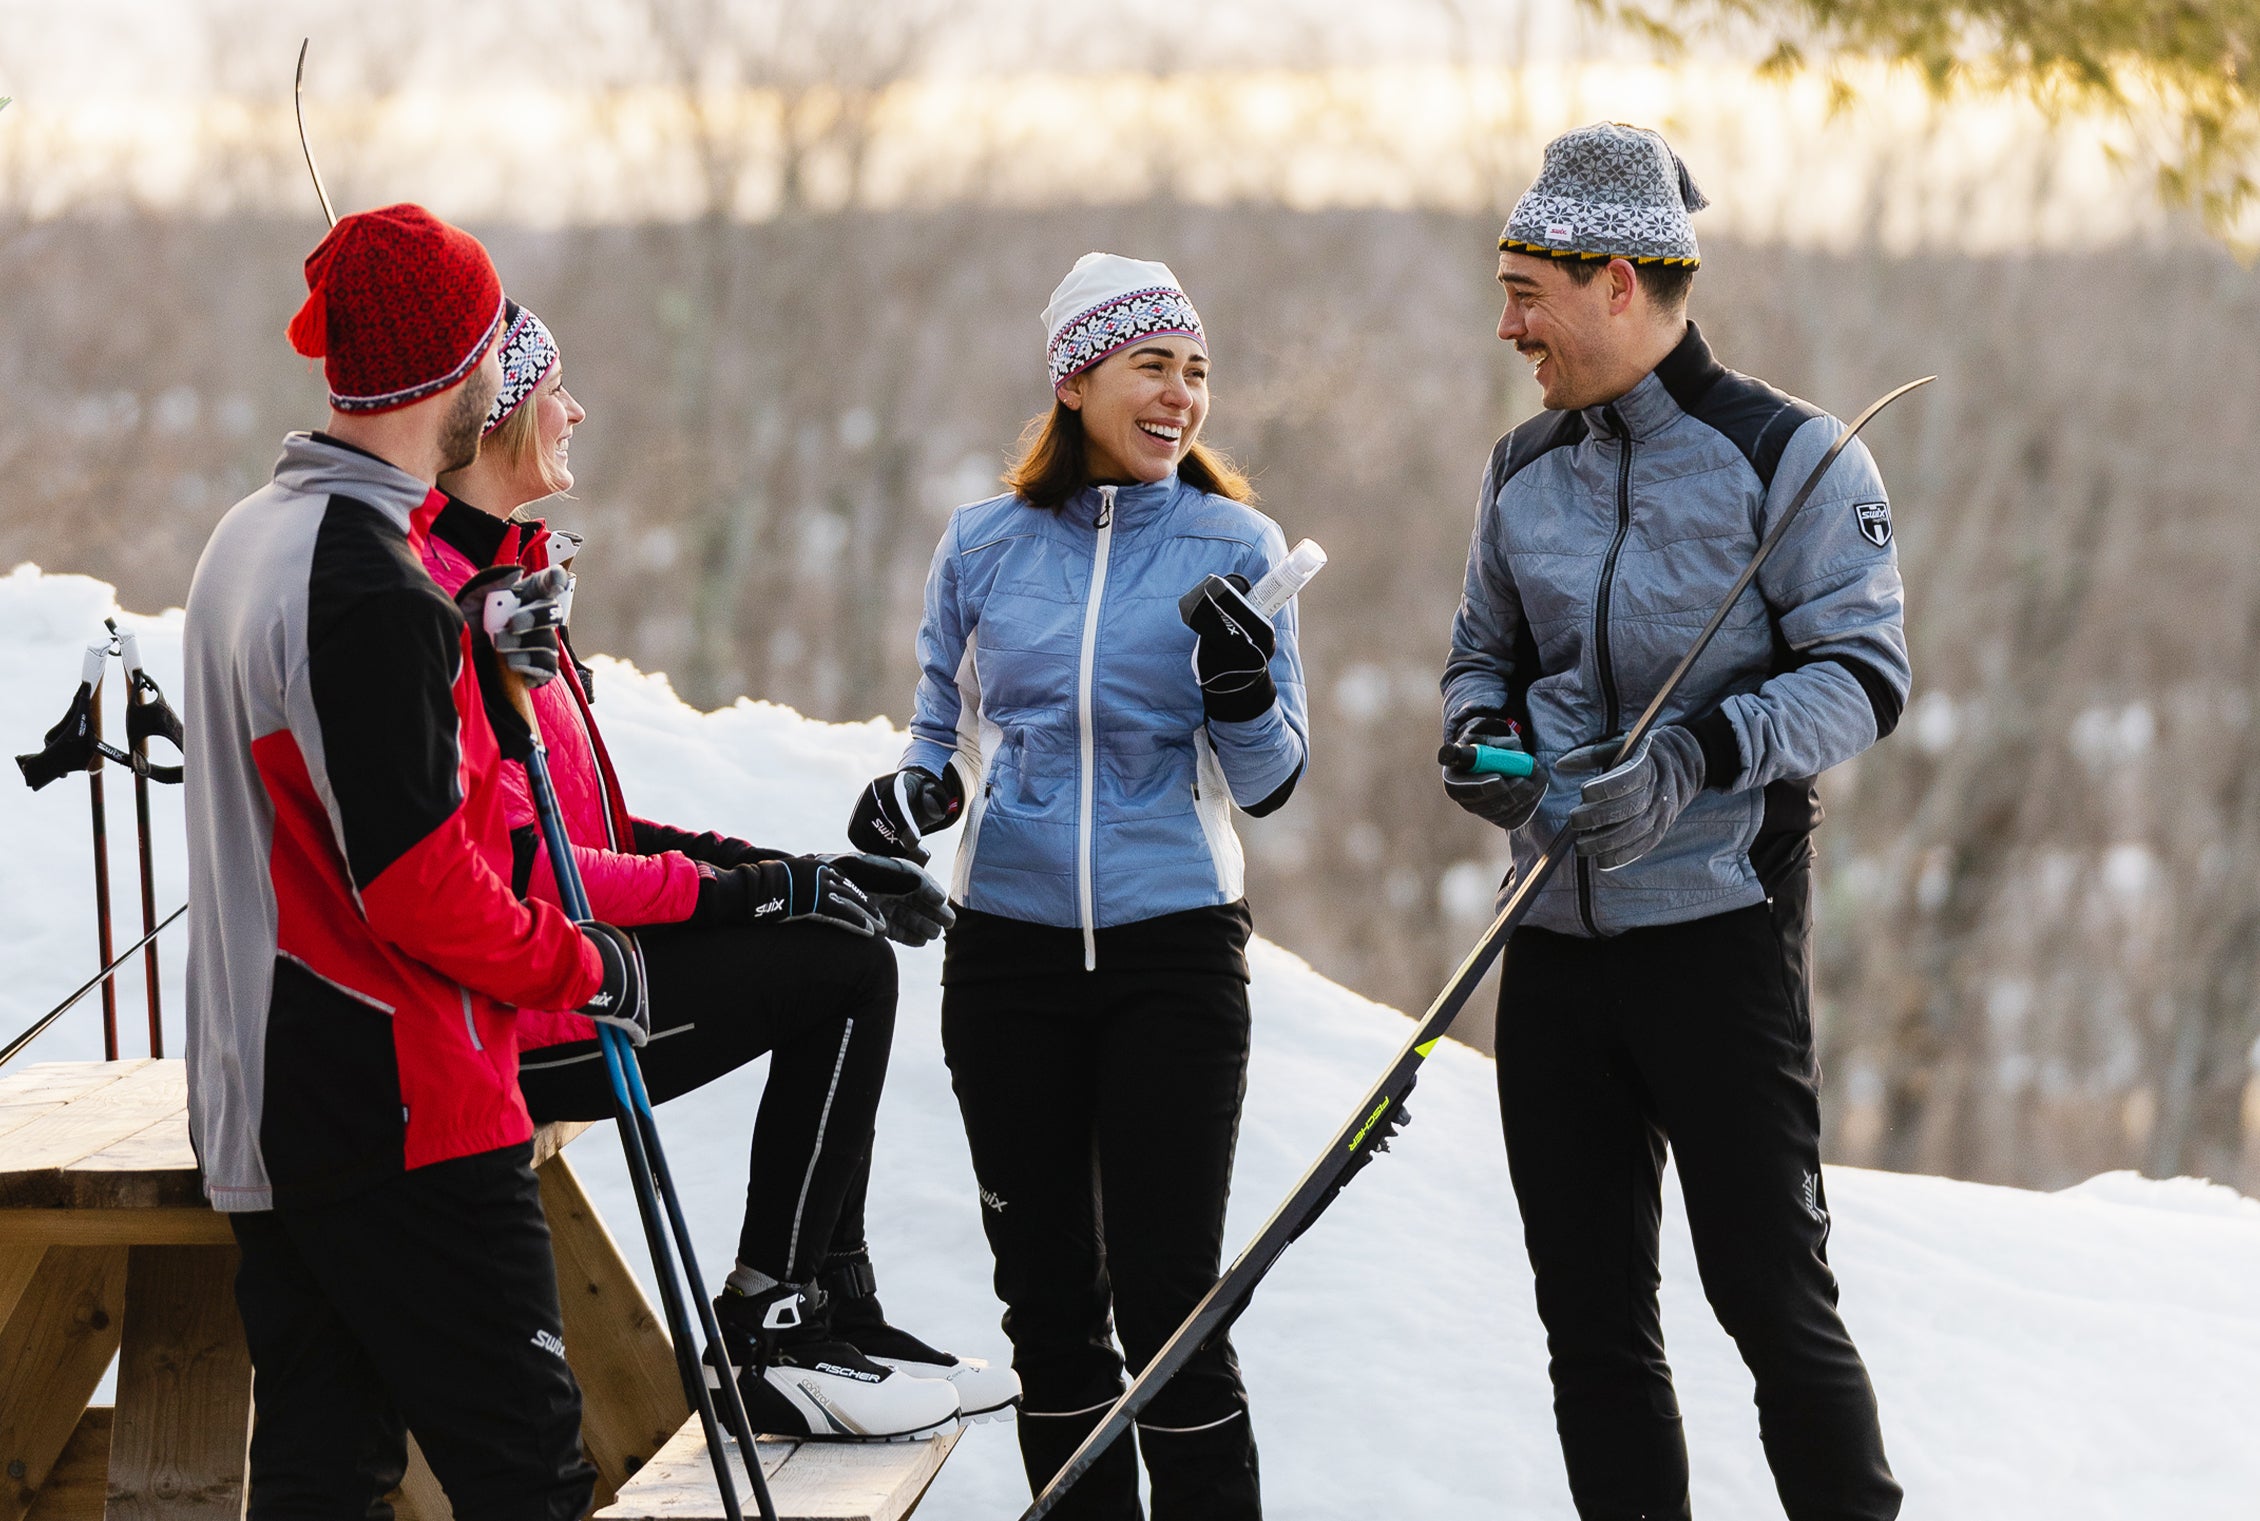 SWIX Canada - Winter gear for outdoor training and competition